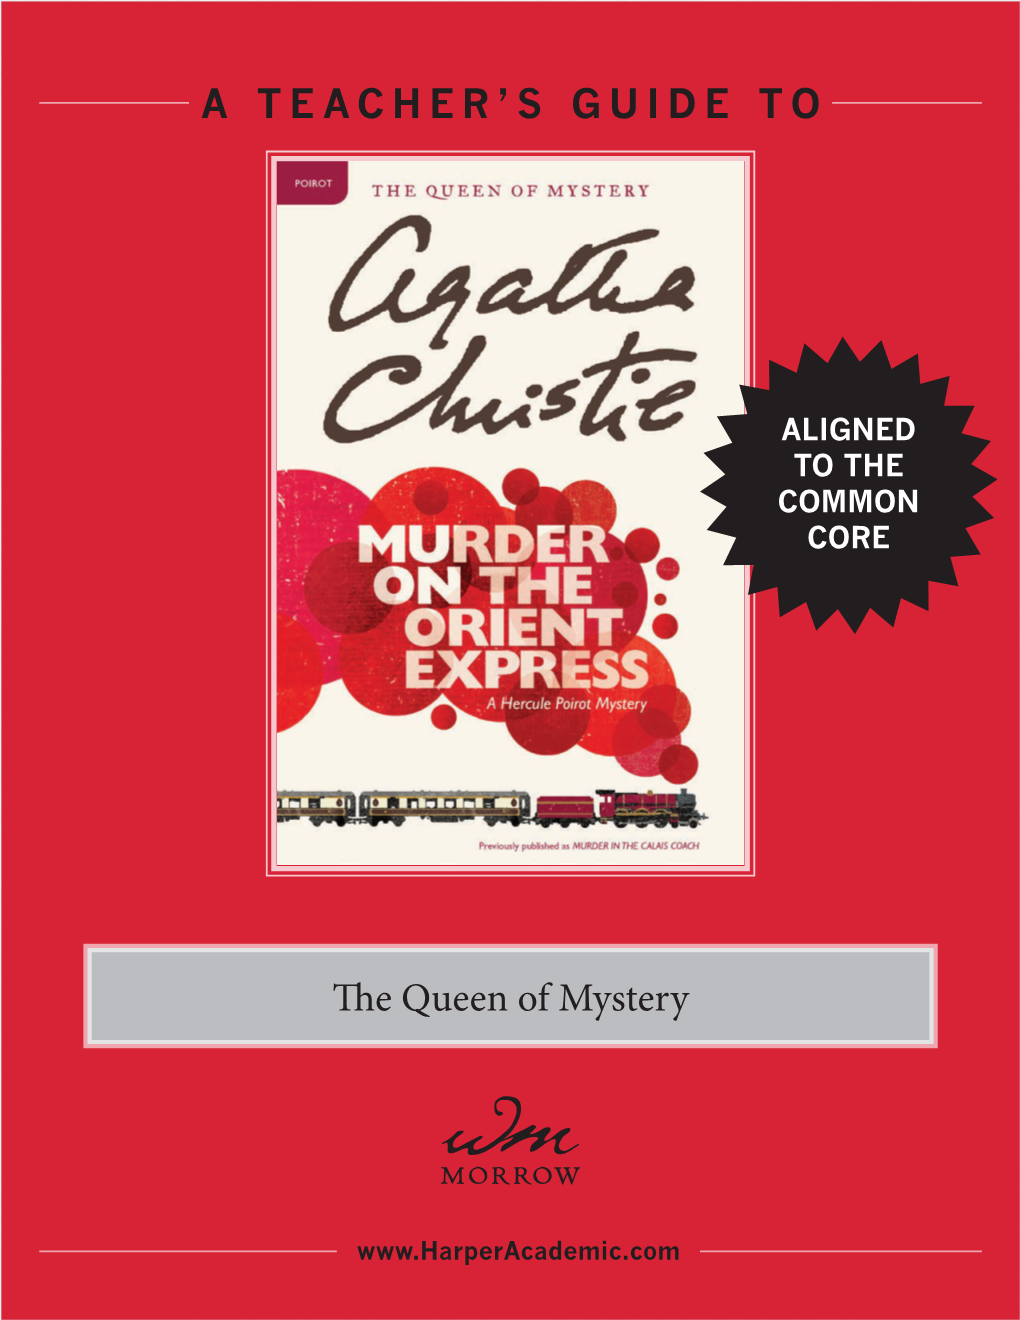 The Queen of Mystery a TEACHER's GUIDE TO